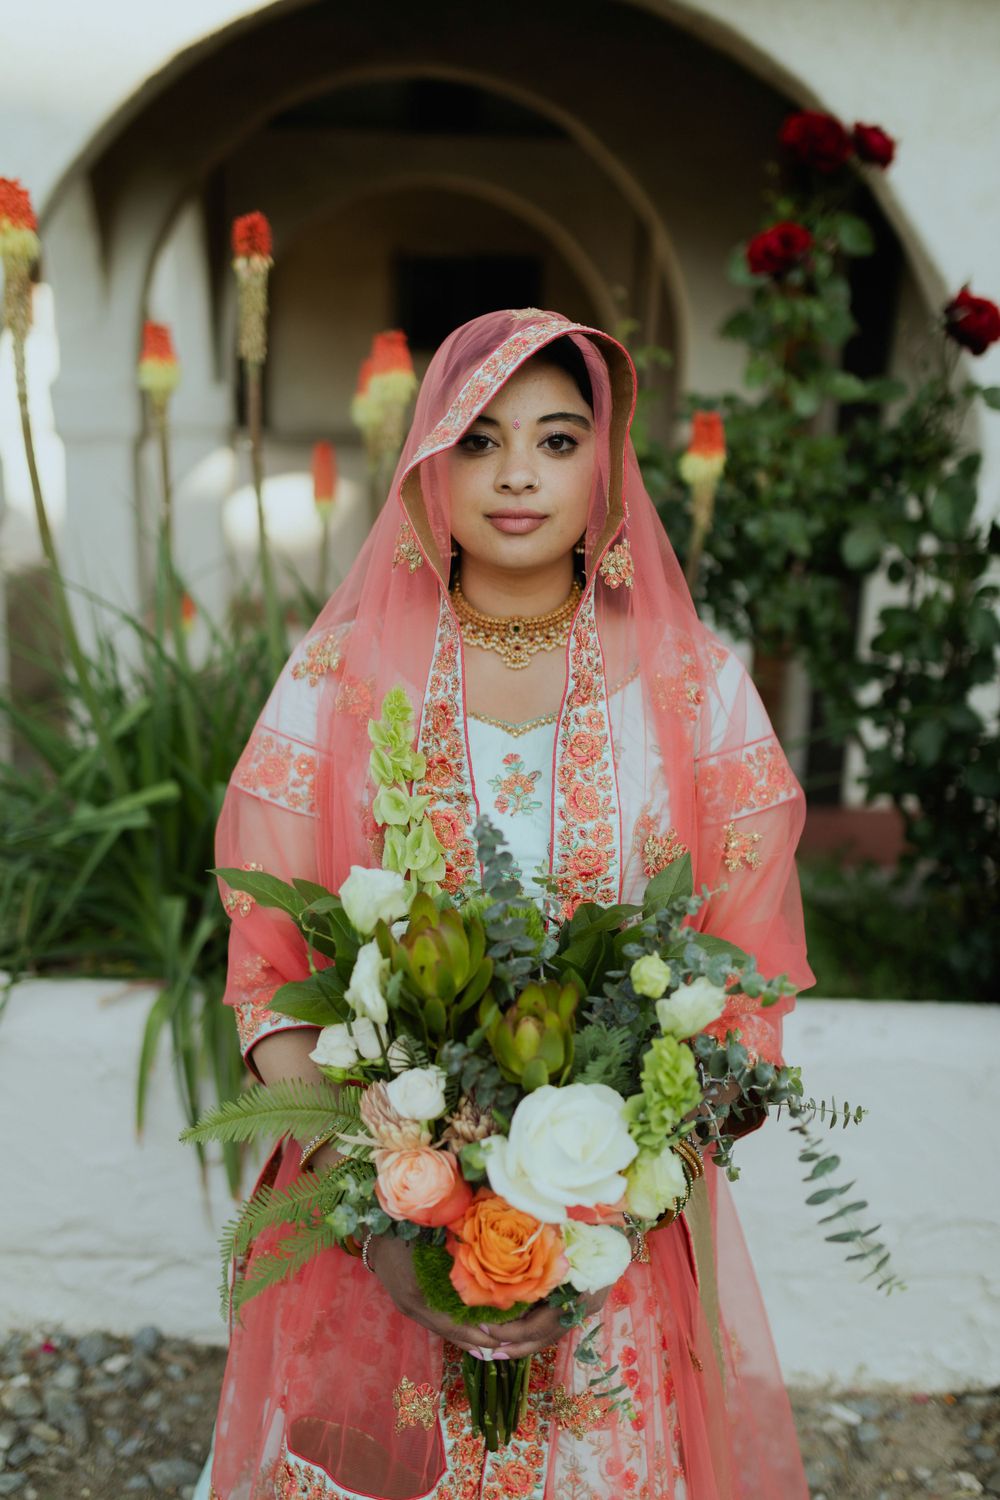 indian bride holding bridal bouquet from galena forest flowers at steamboat hotsprings in reno nevada taken by katherine krakowski photographer